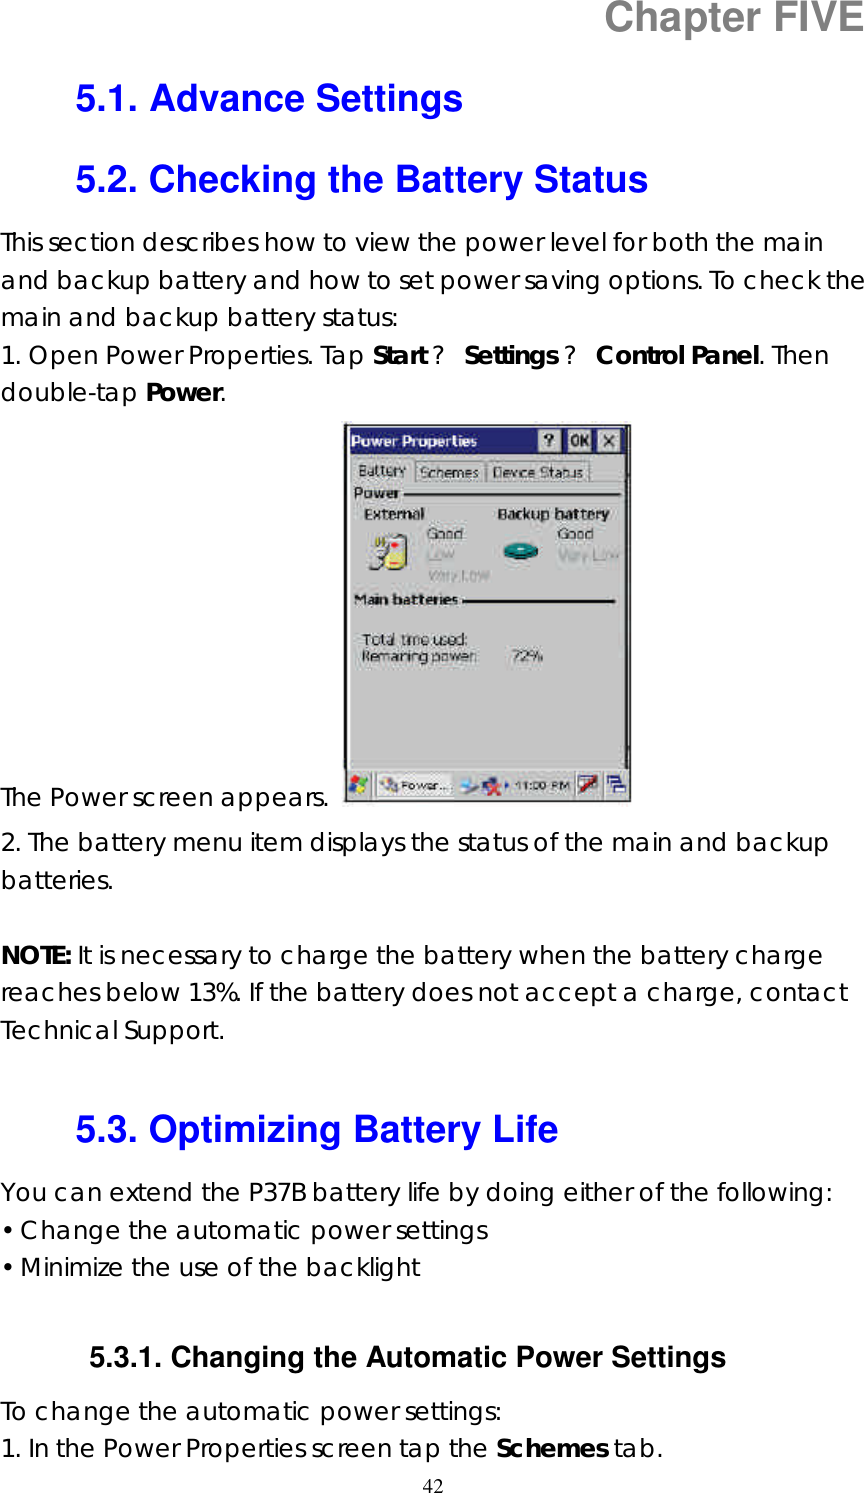  42Chapter FIVE 5.1. Advance Settings 5.2. Checking the Battery Status This section describes how to view the power level for both the main and backup battery and how to set power saving options. To check the main and backup battery status: 1. Open Power Properties. Tap Start ? Settings ? Control Panel. Then double-tap Power.  The Power screen appears.   2. The battery menu item displays the status of the main and backup batteries.  NOTE: It is necessary to charge the battery when the battery charge reaches below 13%. If the battery does not accept a charge, contact Technical Support.  5.3. Optimizing Battery Life You can extend the P37B battery life by doing either of the following: • Change the automatic power settings • Minimize the use of the backlight  5.3.1. Changing the Automatic Power Settings To change the automatic power settings: 1. In the Power Properties screen tap the Schemes tab. 